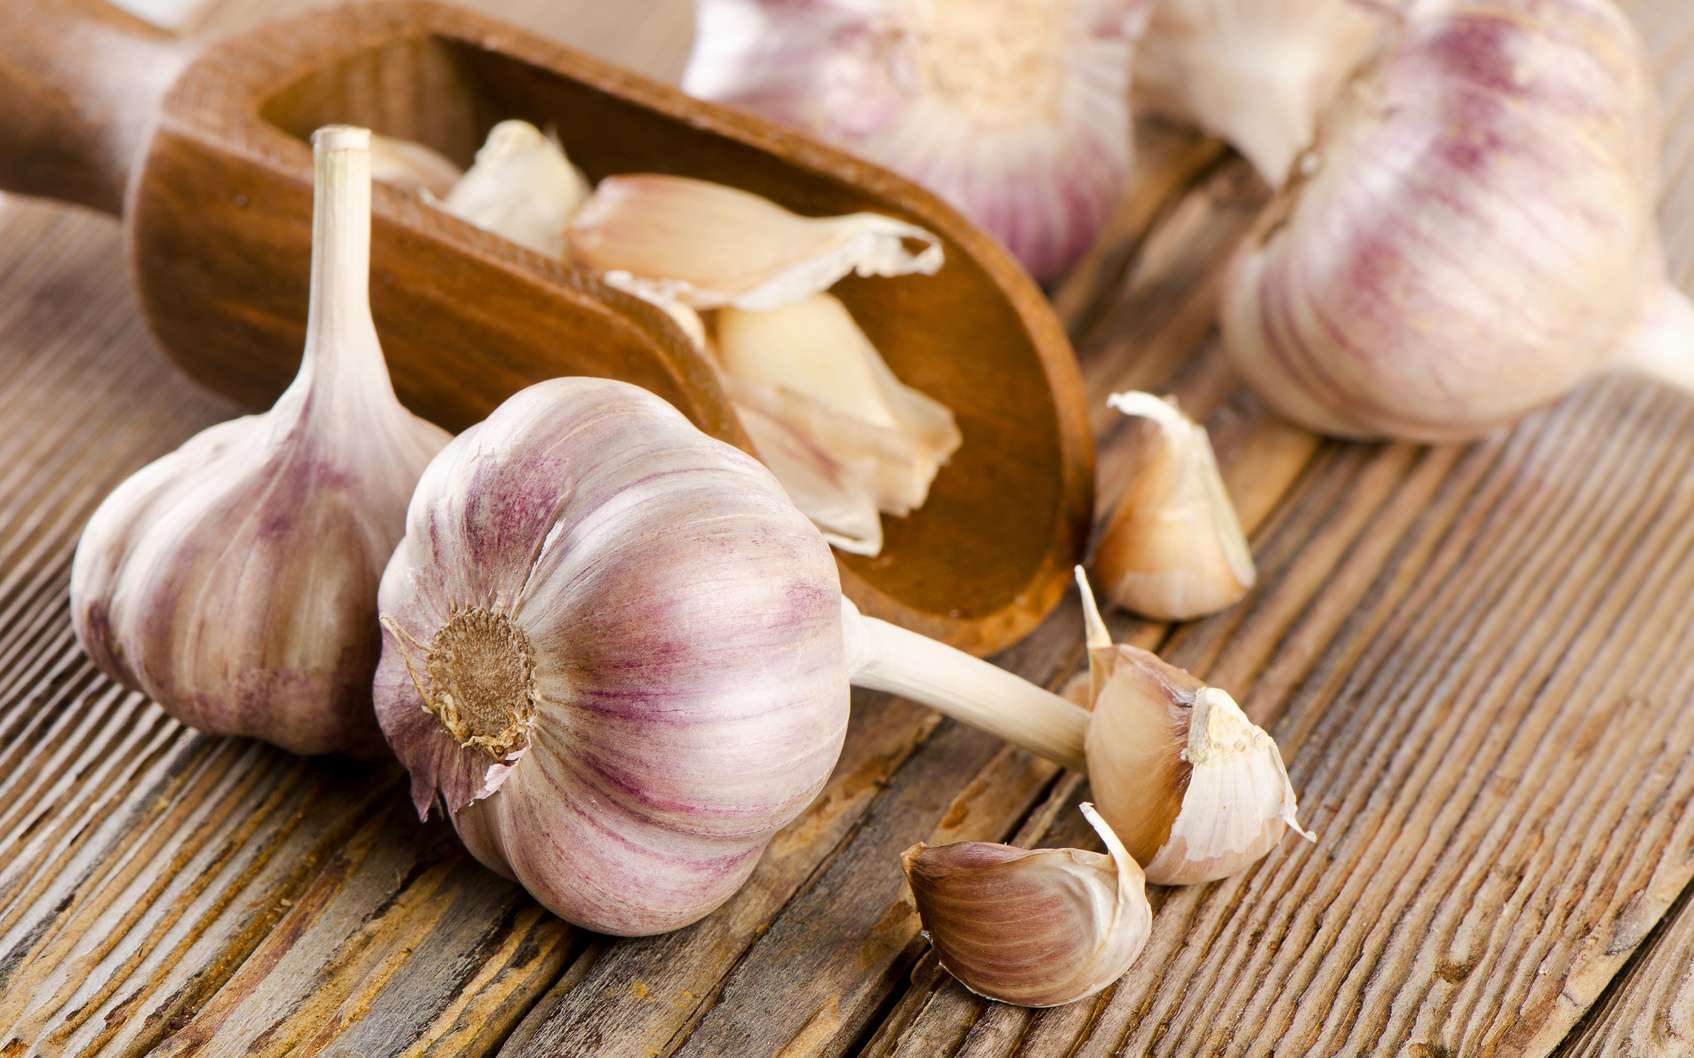 Garlic: what are its health benefits?